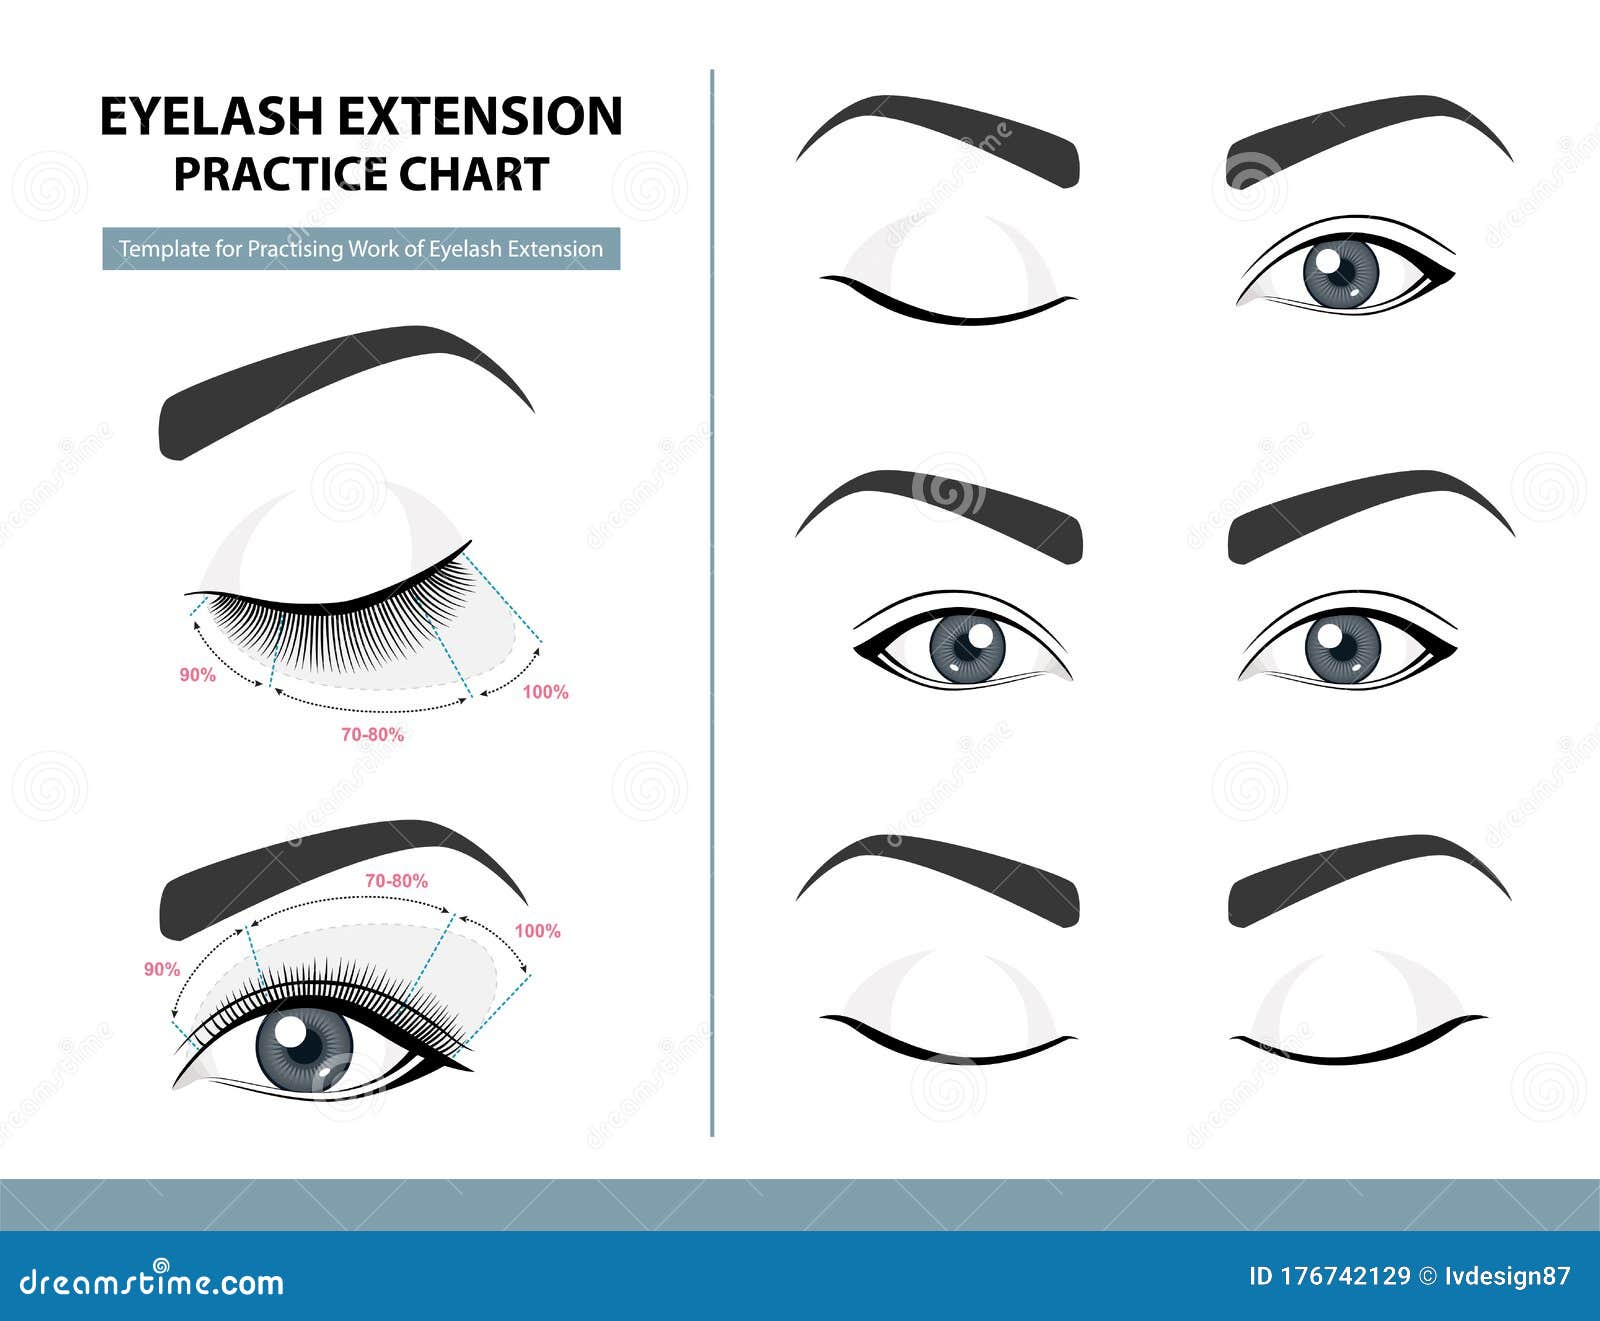 training poster, practice chart. density of eyelash extension for great look. eyelash extension guide. infographic 